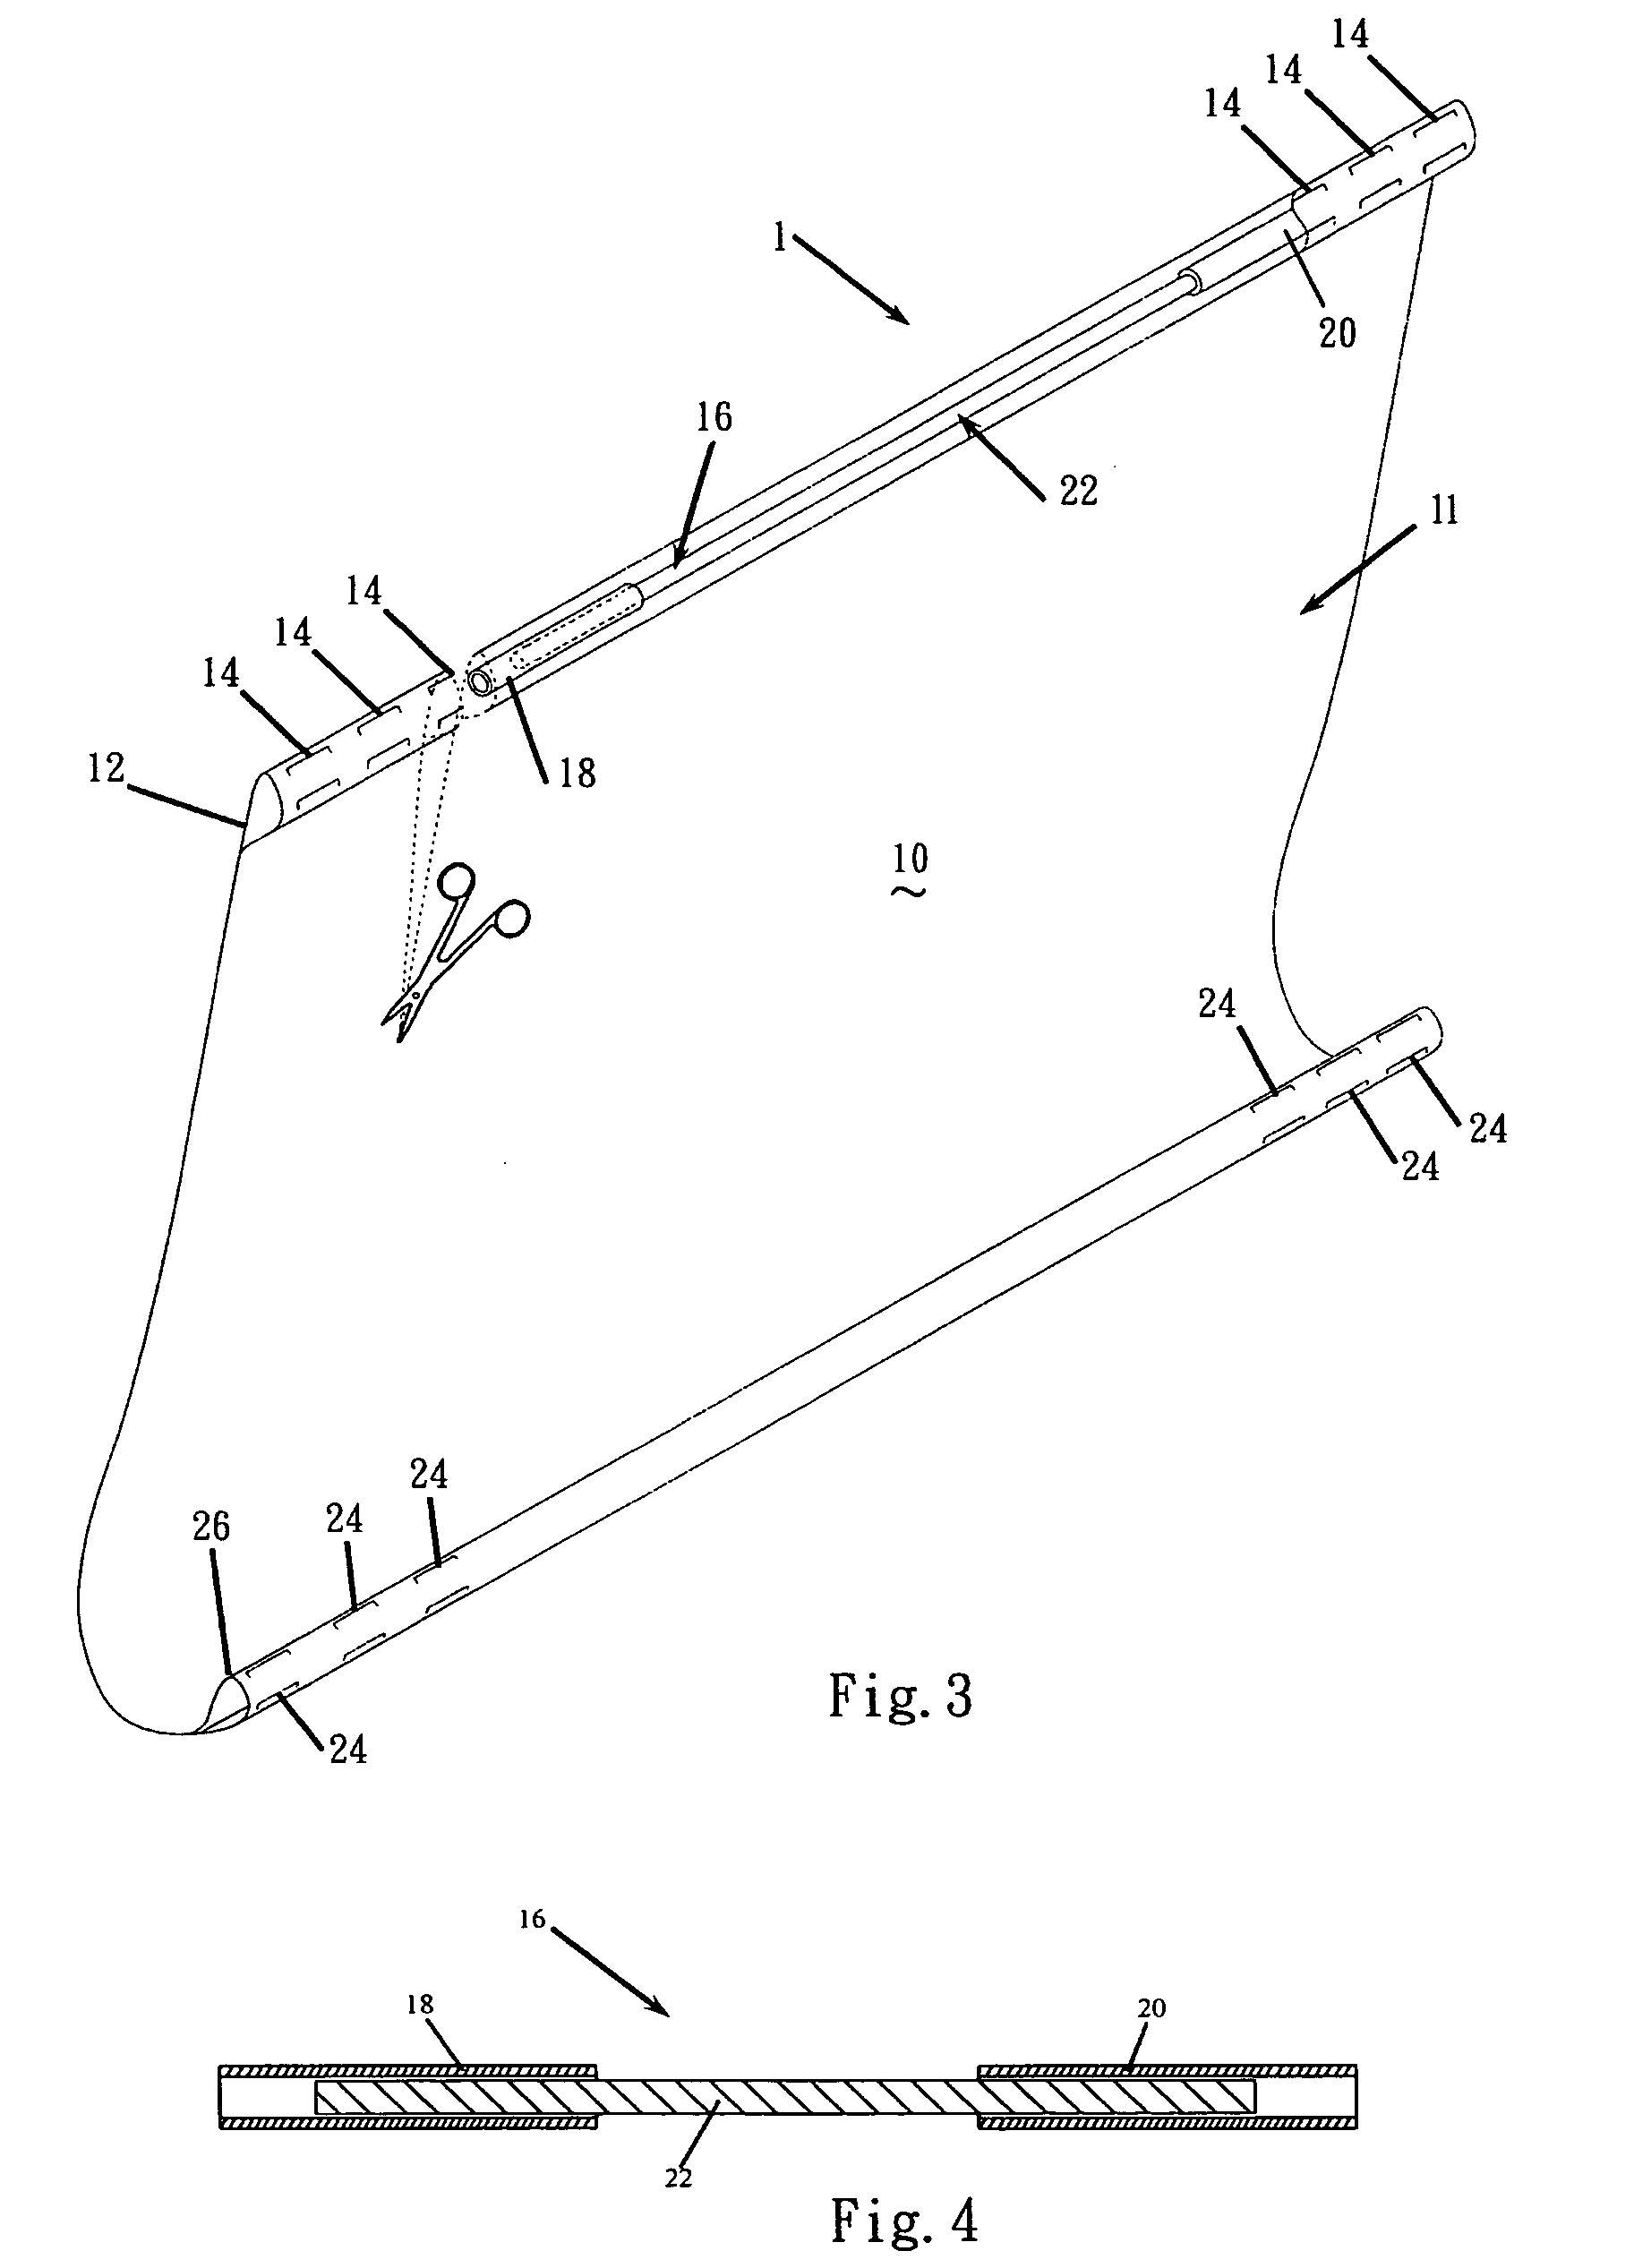 Customizable row assembly and method of manufacturing a window covering